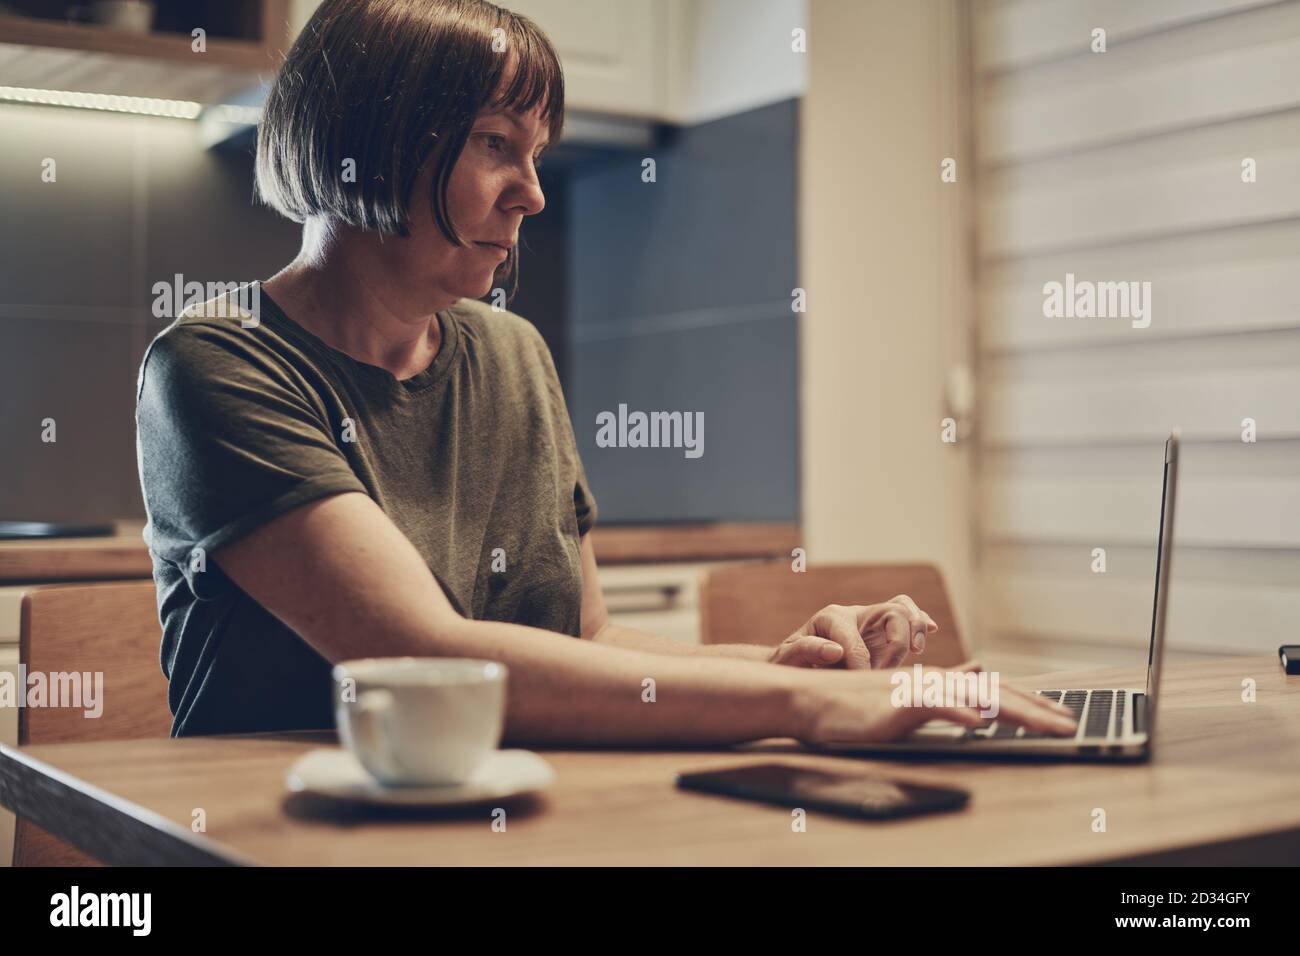 Female freelancer working from home on laptop computer in small business home office interior at night Stock Photo